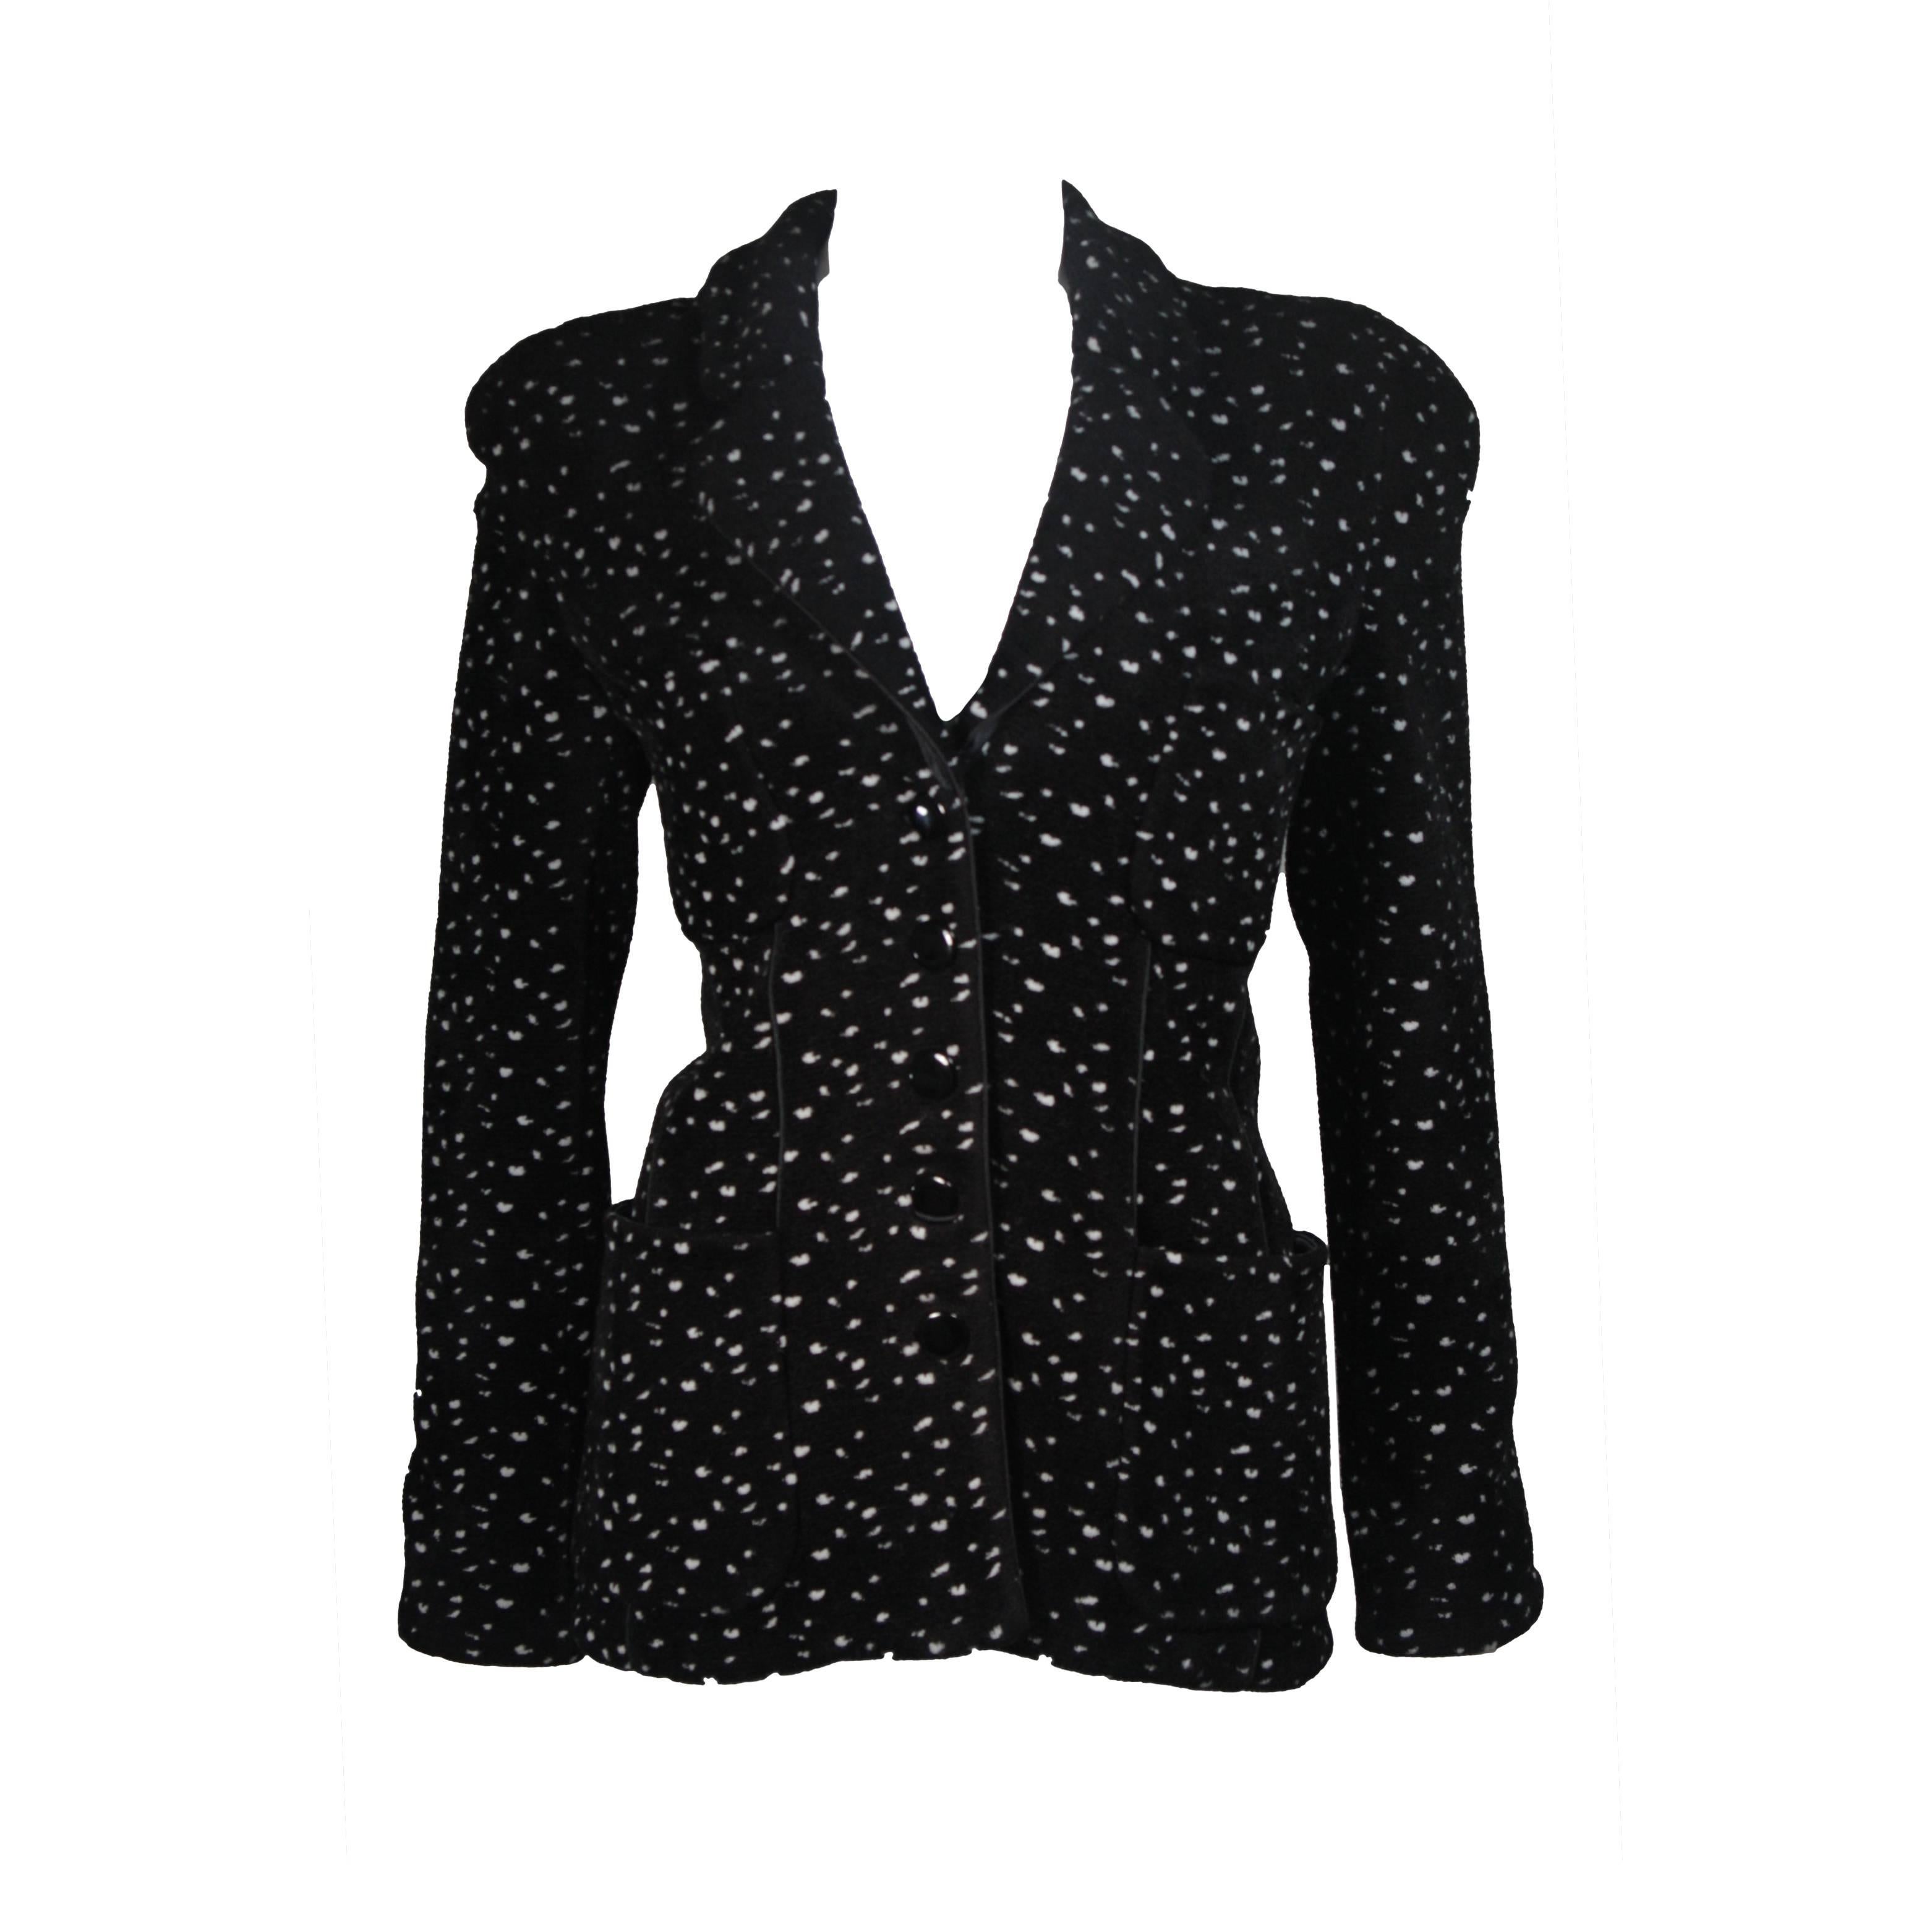 Giorgio Armani Black and White Speckle Wool Blend Jacket with Piping Size 46